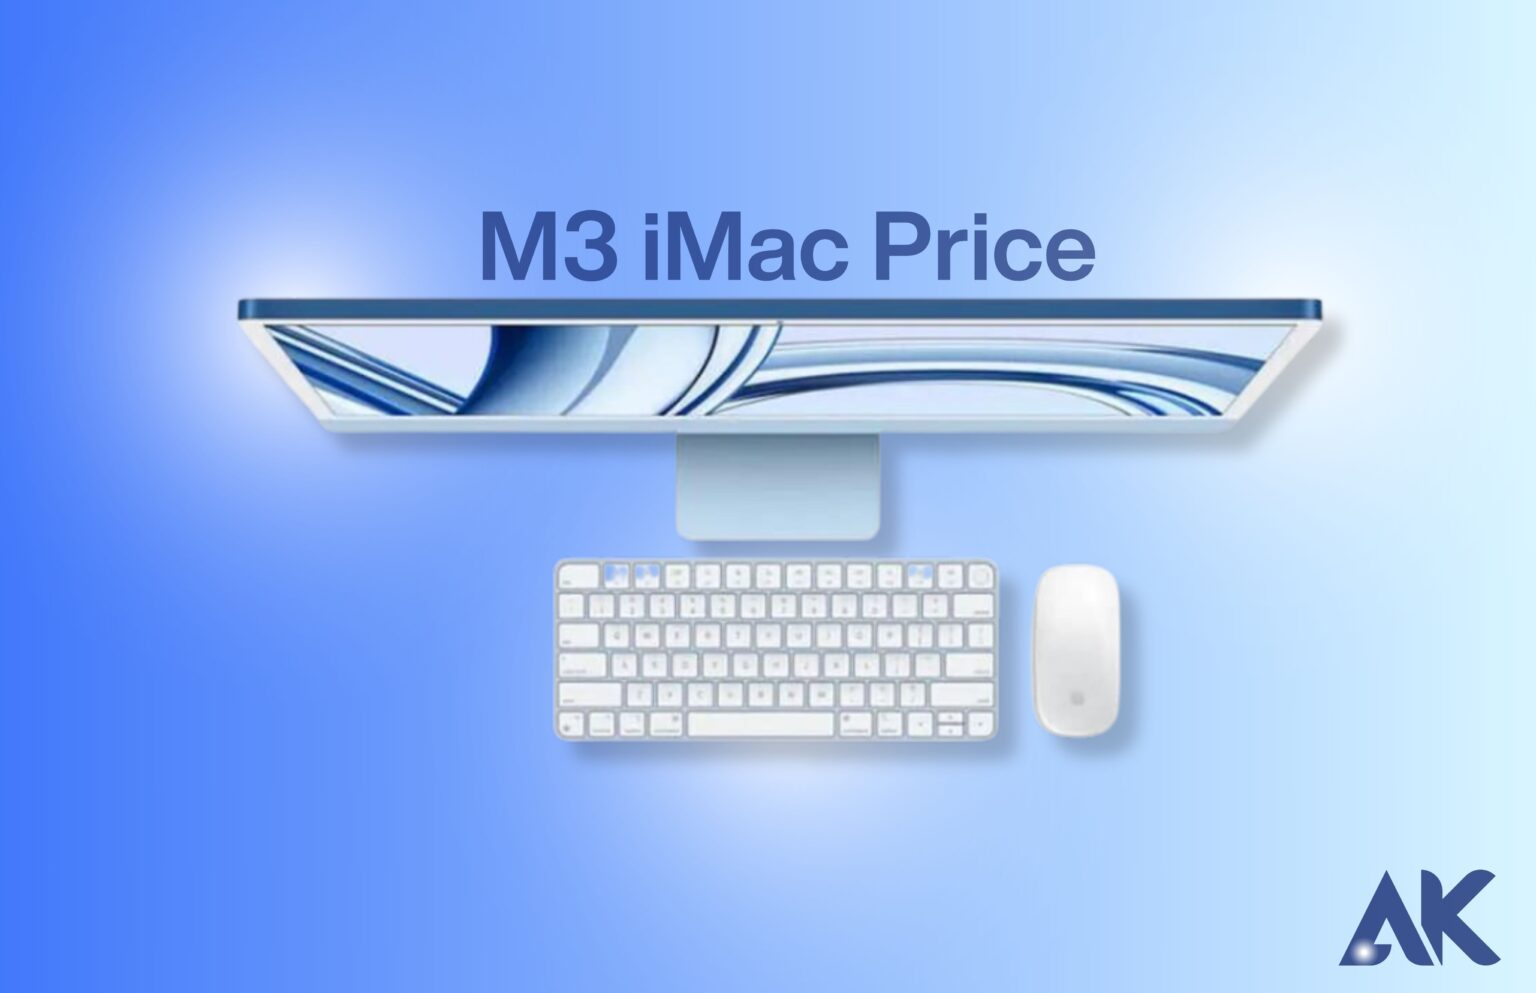 M3 iMac Price: How Much Will Apple's Next-Generation All-in-One Desktop Cost?